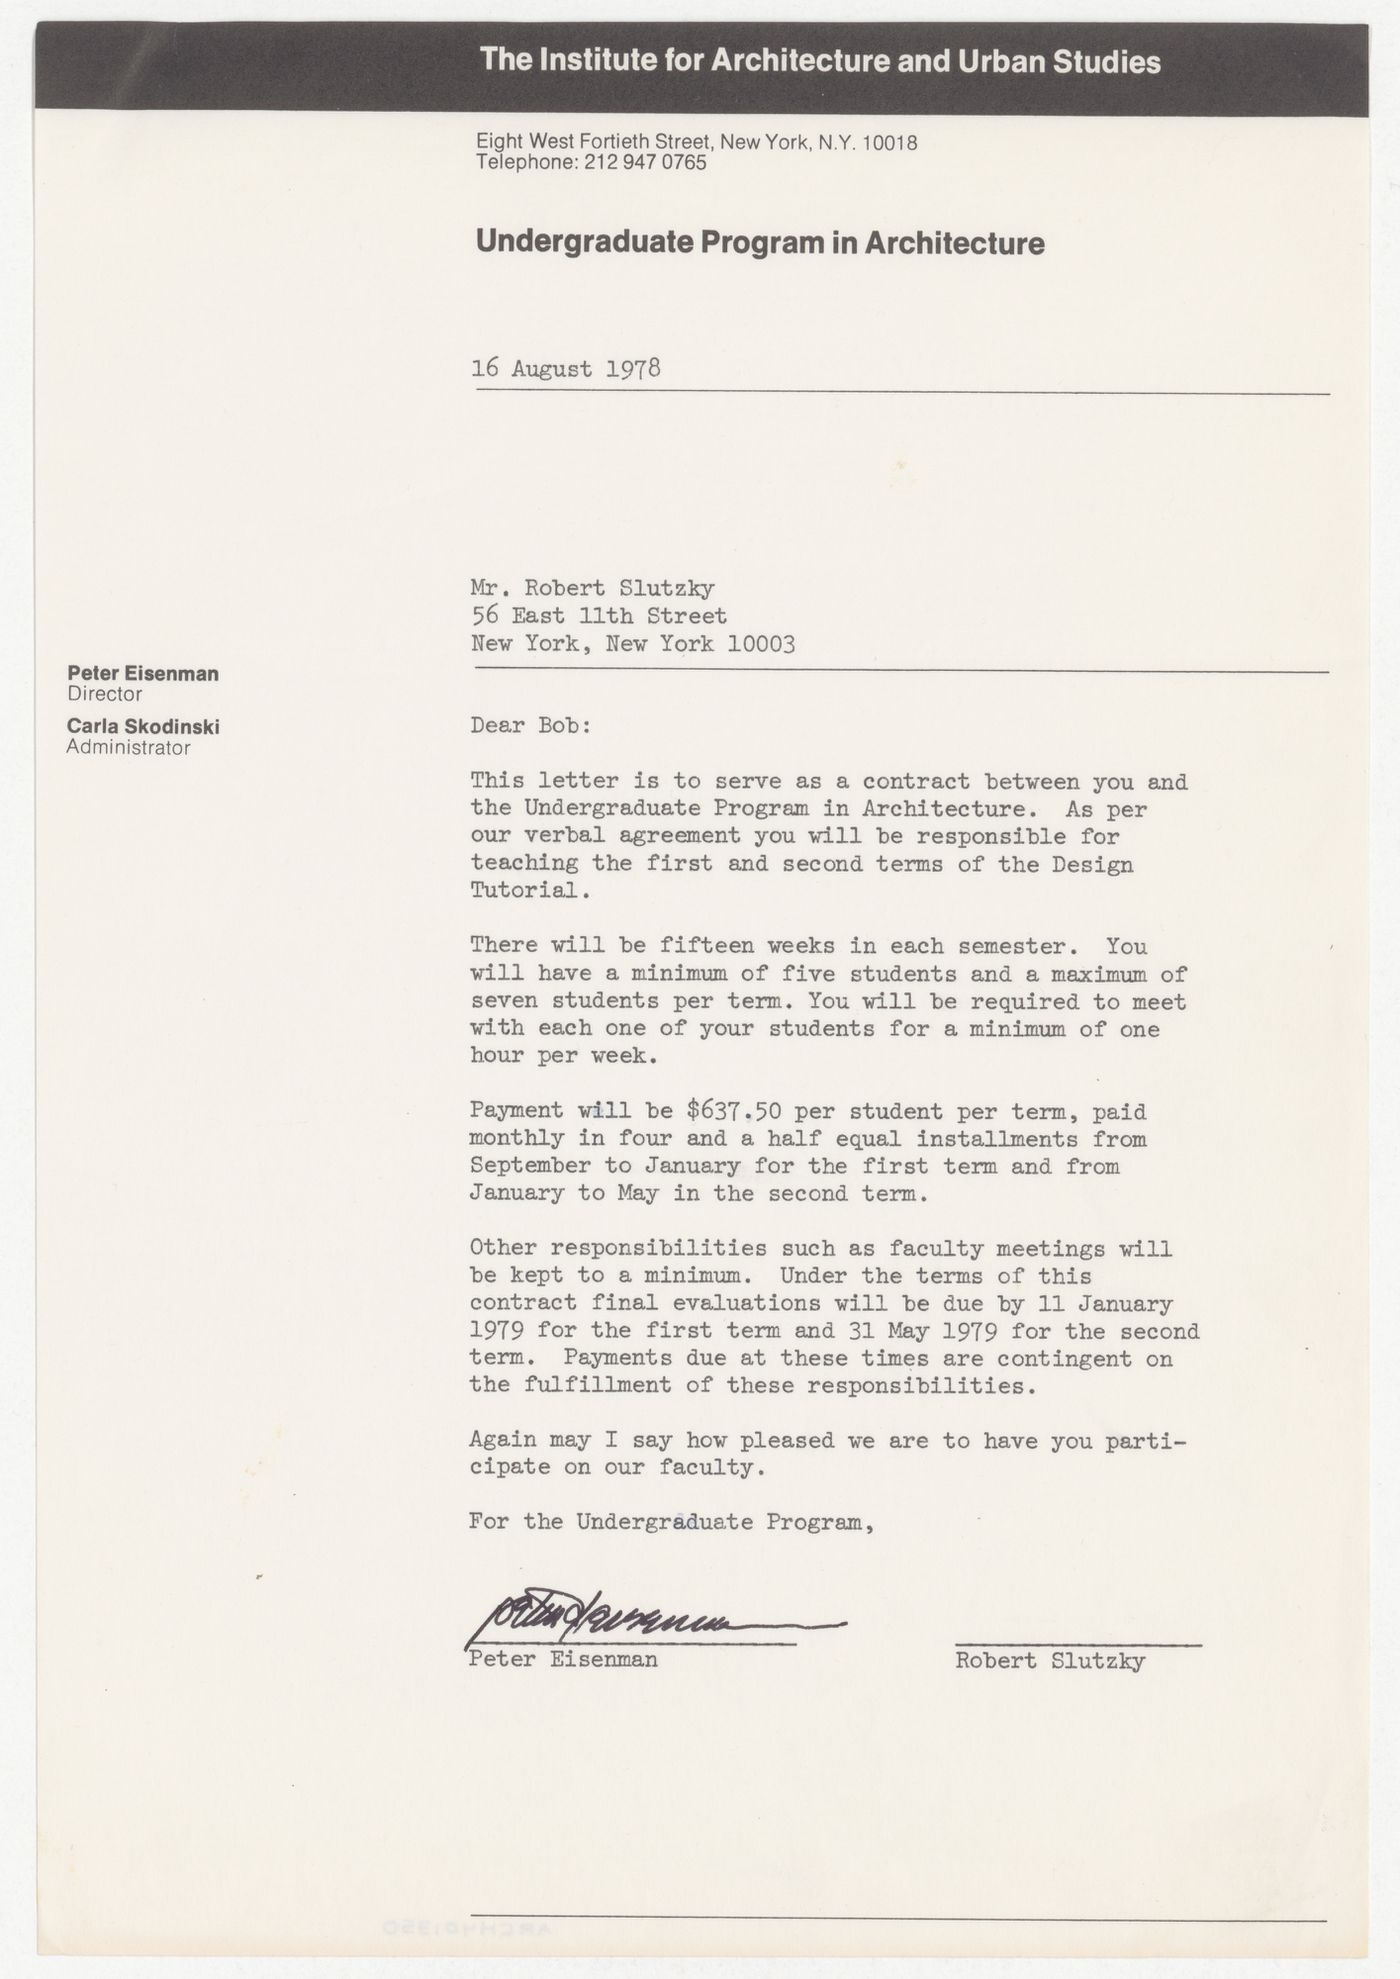 Contract letter from Peter D. Eisenman to Robert Slutzky for teaching work in the Undergraduate Program in Architecture at IAUS